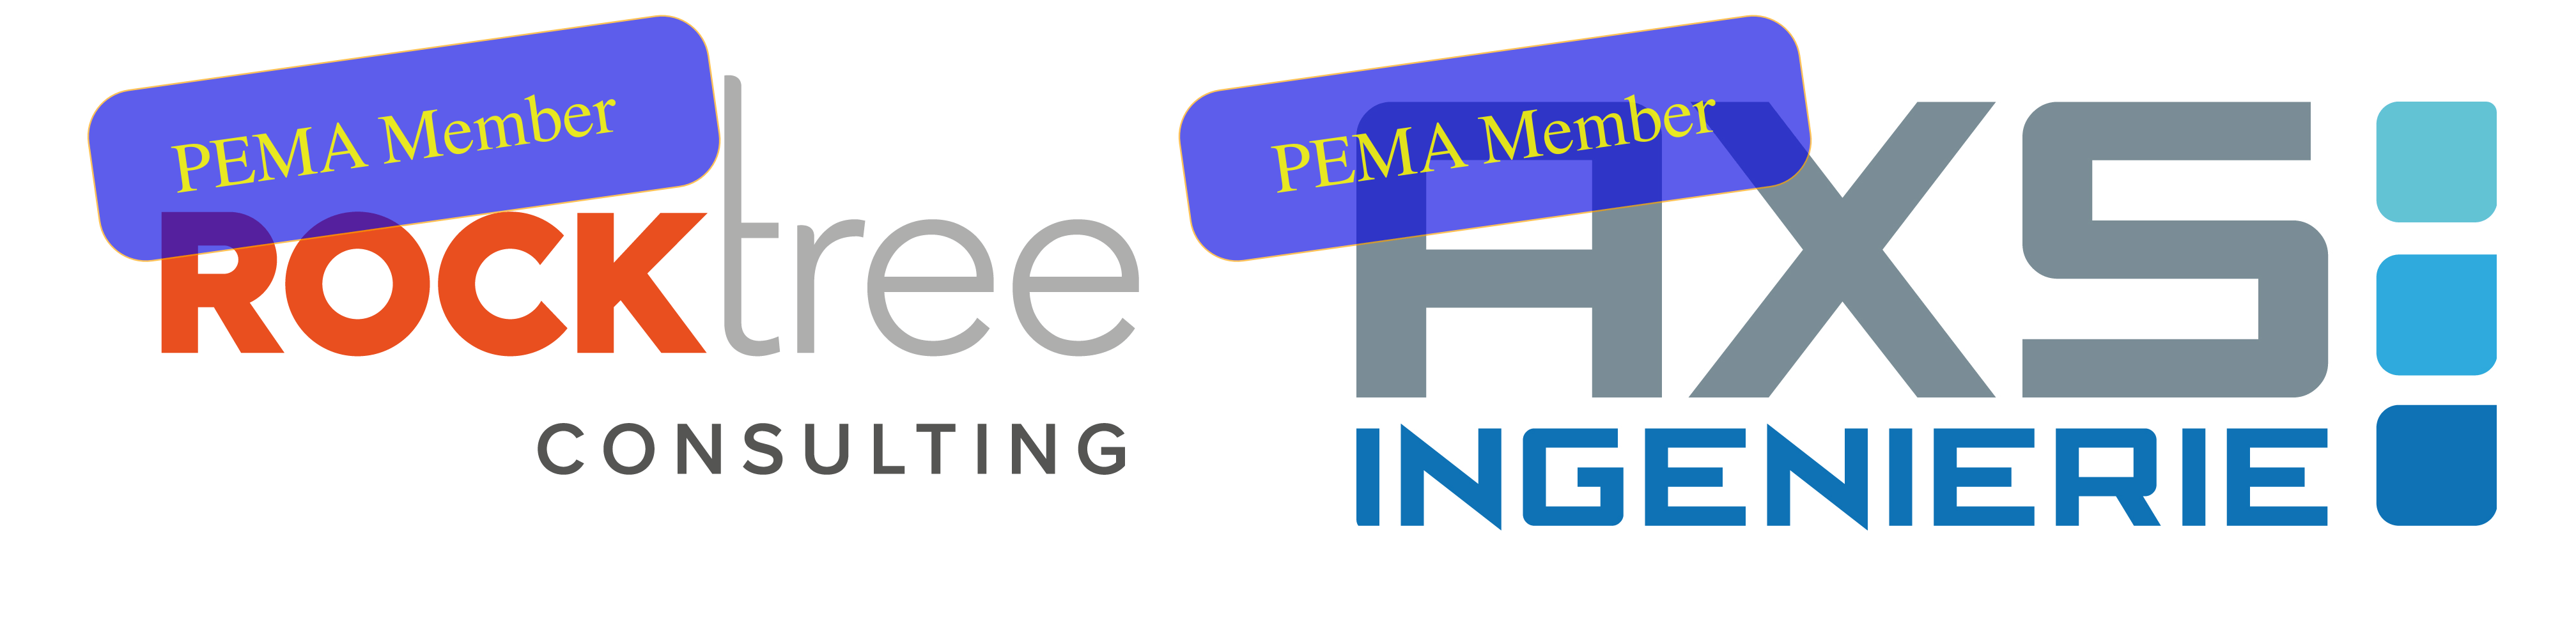 PEMA welcomes 2 new members – AXS INGENIERIE and Rocktree Consulting